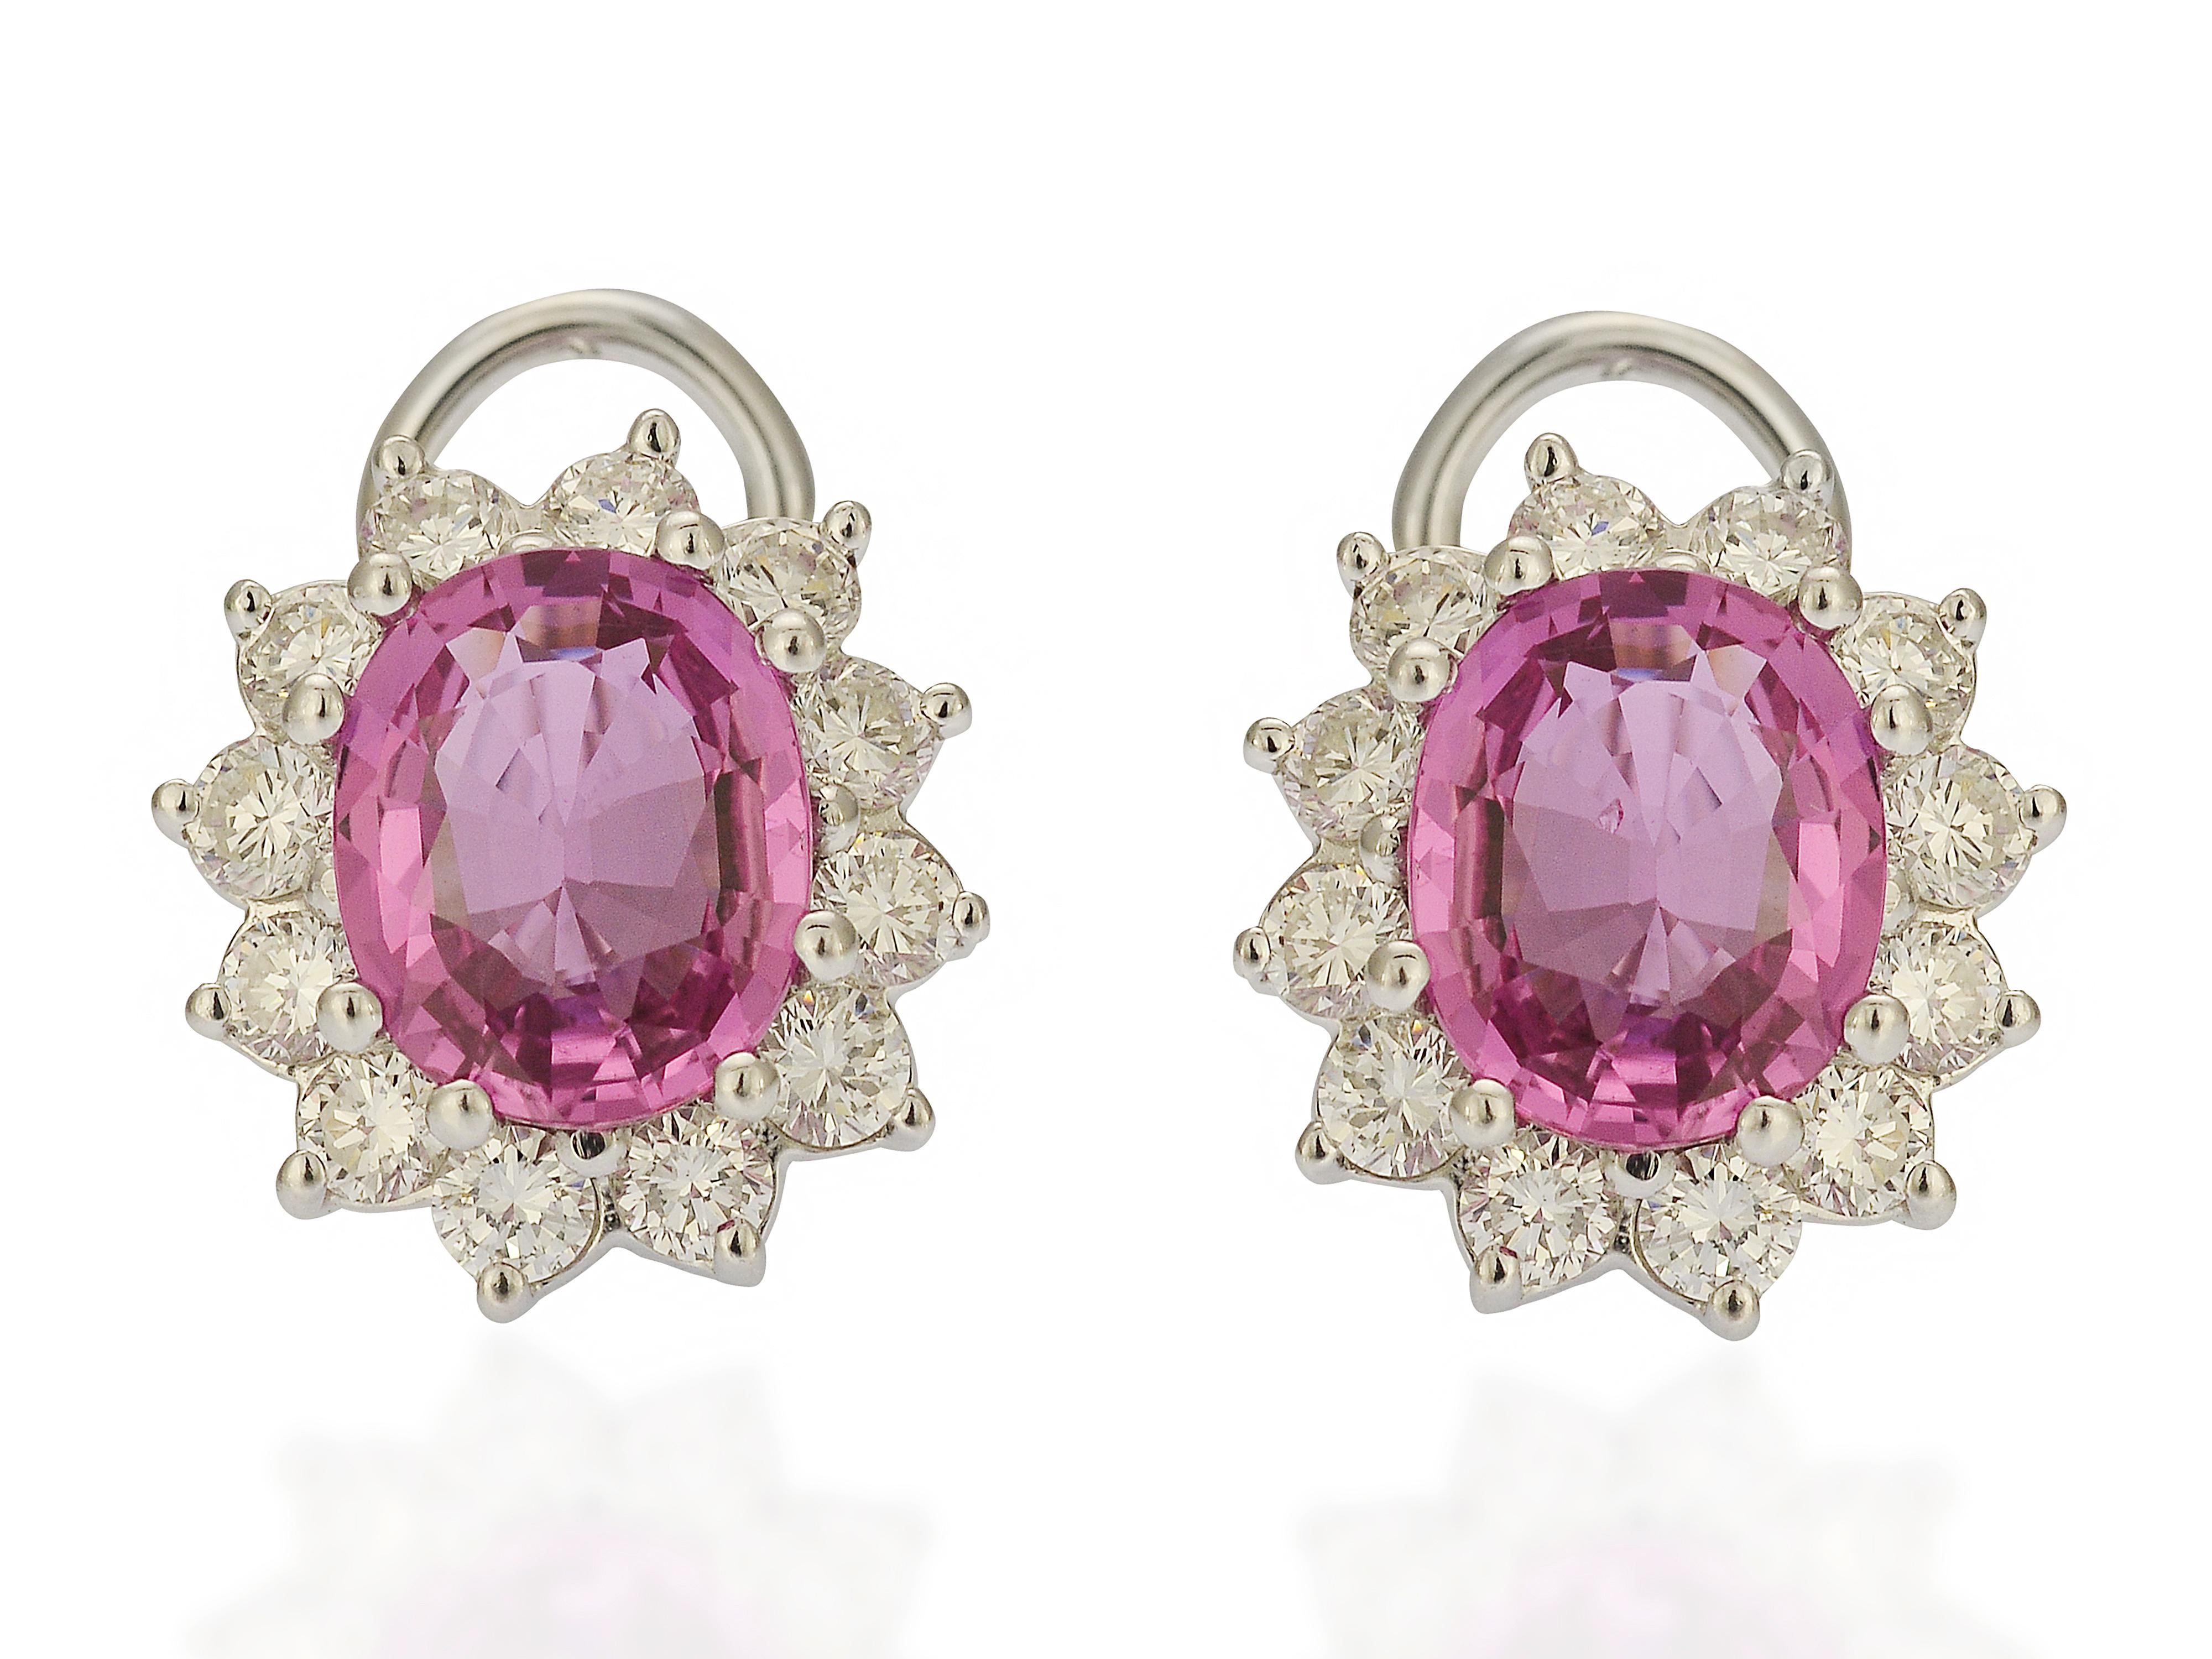 These bright pink oval cut sapphire earrings are a classic design that will never go out of style. The setting is an 18 karat white gold mounting containing over 2 carats of VS clarity & G color diamonds. The closure is a post with hinged Omega